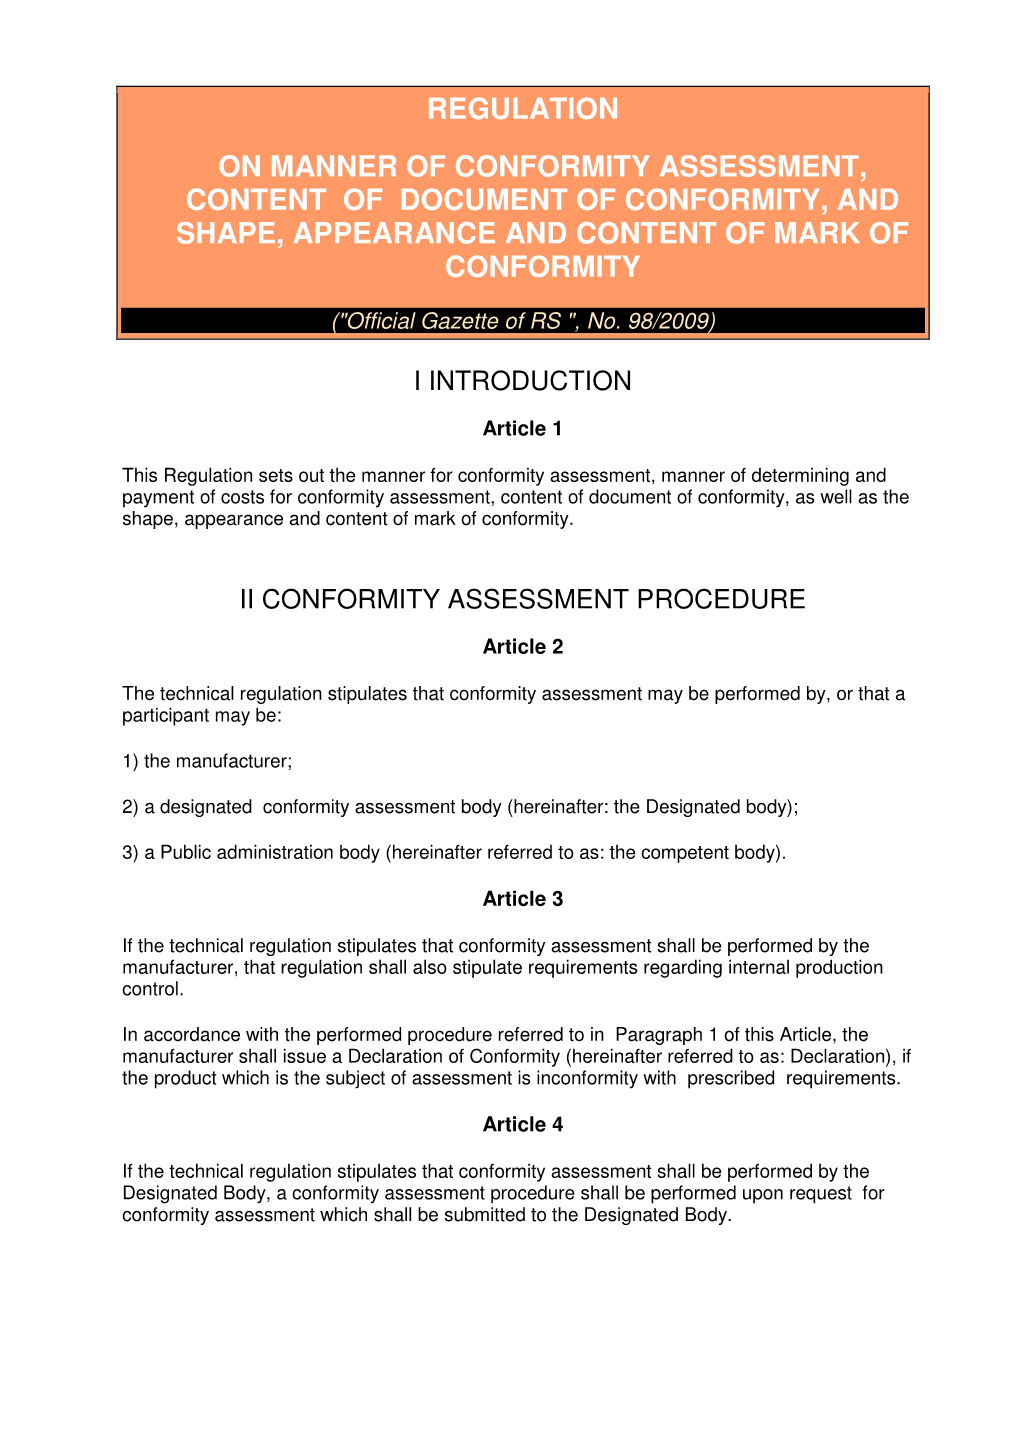 Regulation on Manner of Performing Conformity Assessment, Content of the Document of Conformity, and Shape, Appearance